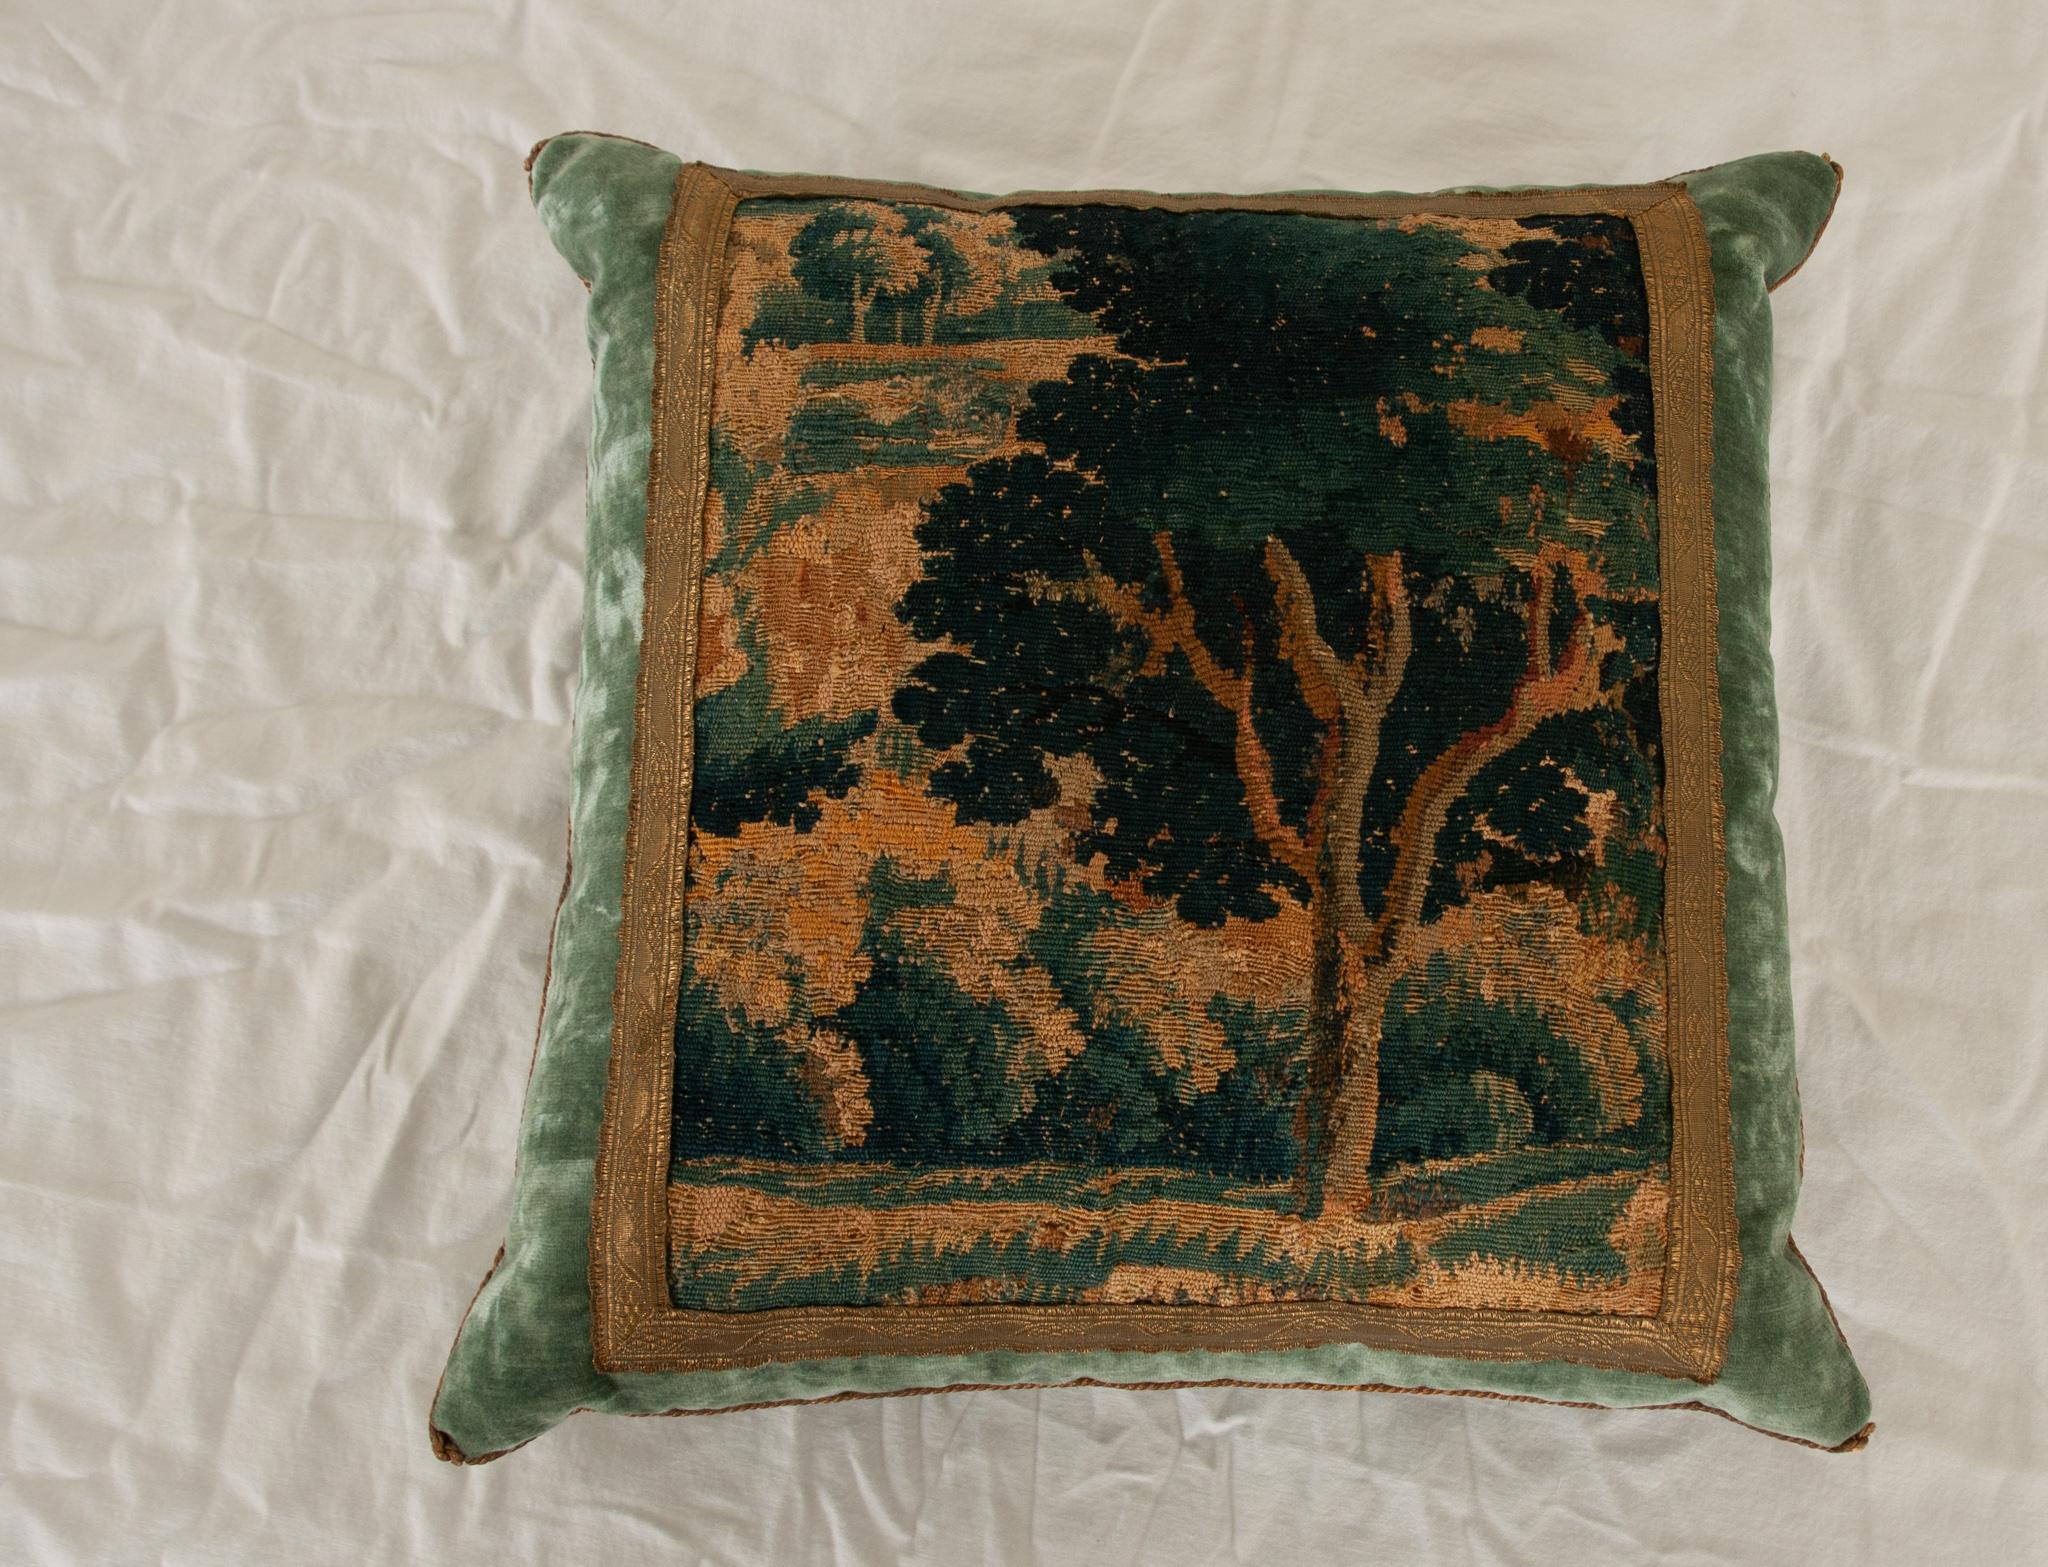 Late 17th to early 18th century Flemish needlepoint tapestry fragment depicting a countryside estate in shades of green, blue, and gold. Framed with antique gold metallic galon with a floral motif on stunning blue velvet. Vintage gold metallic